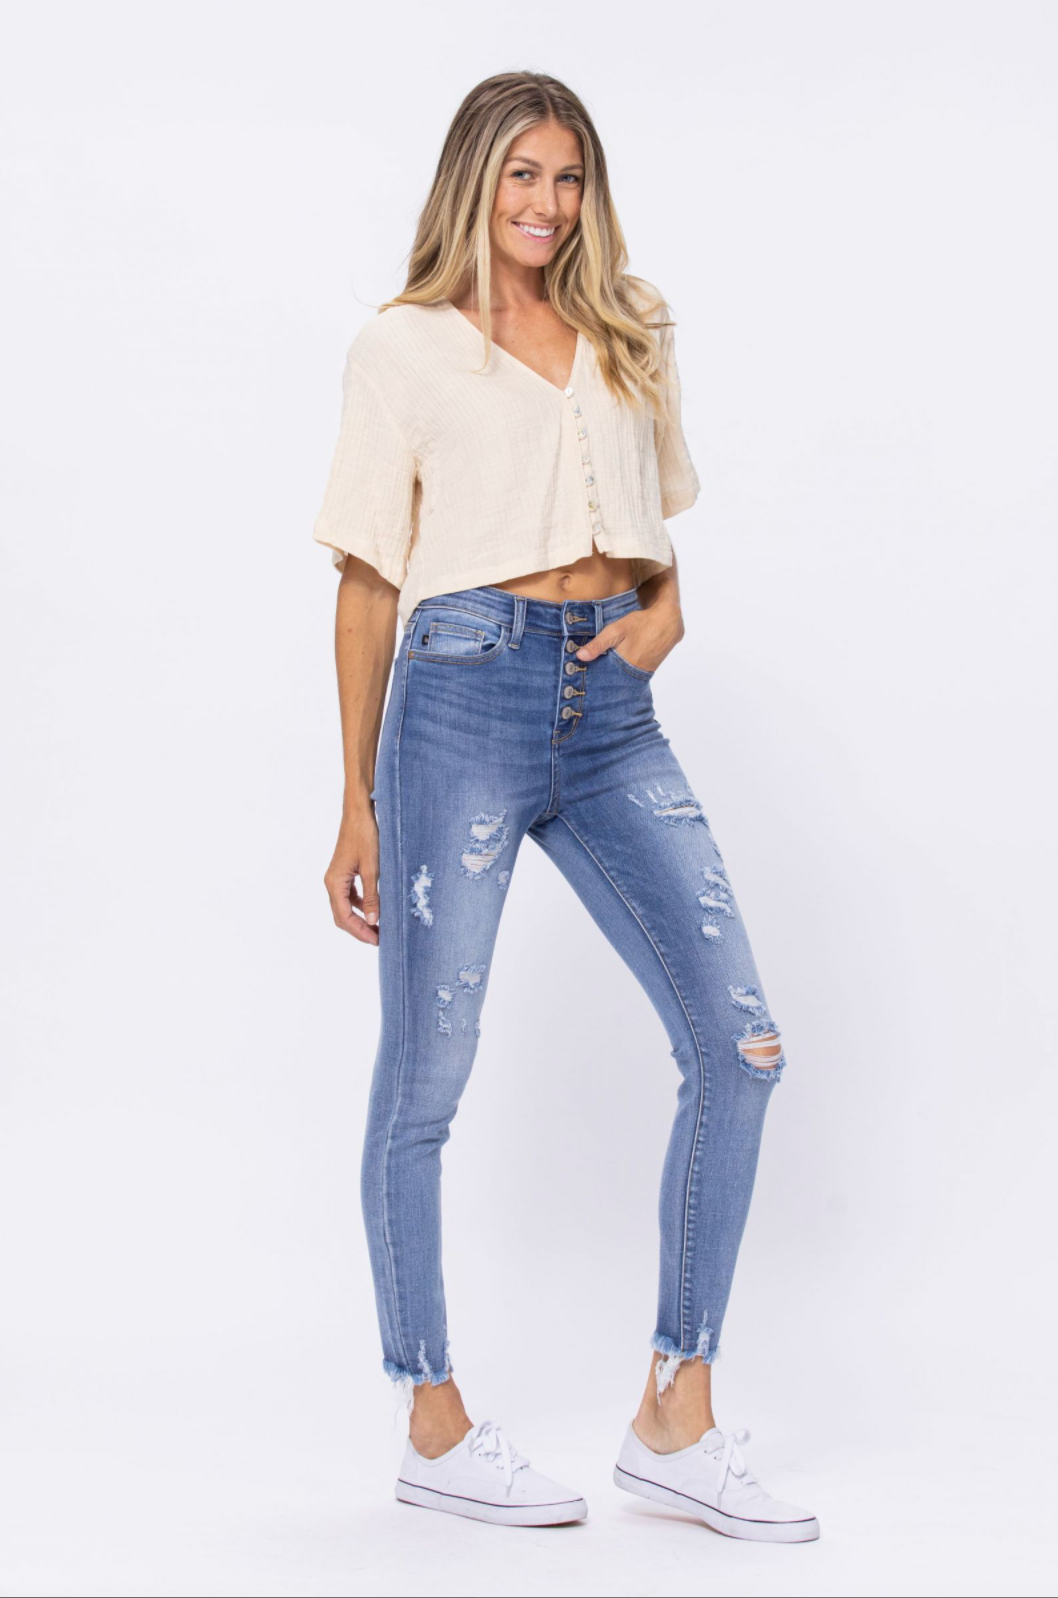 Judy Blue Destroyed Button Fly Jeans